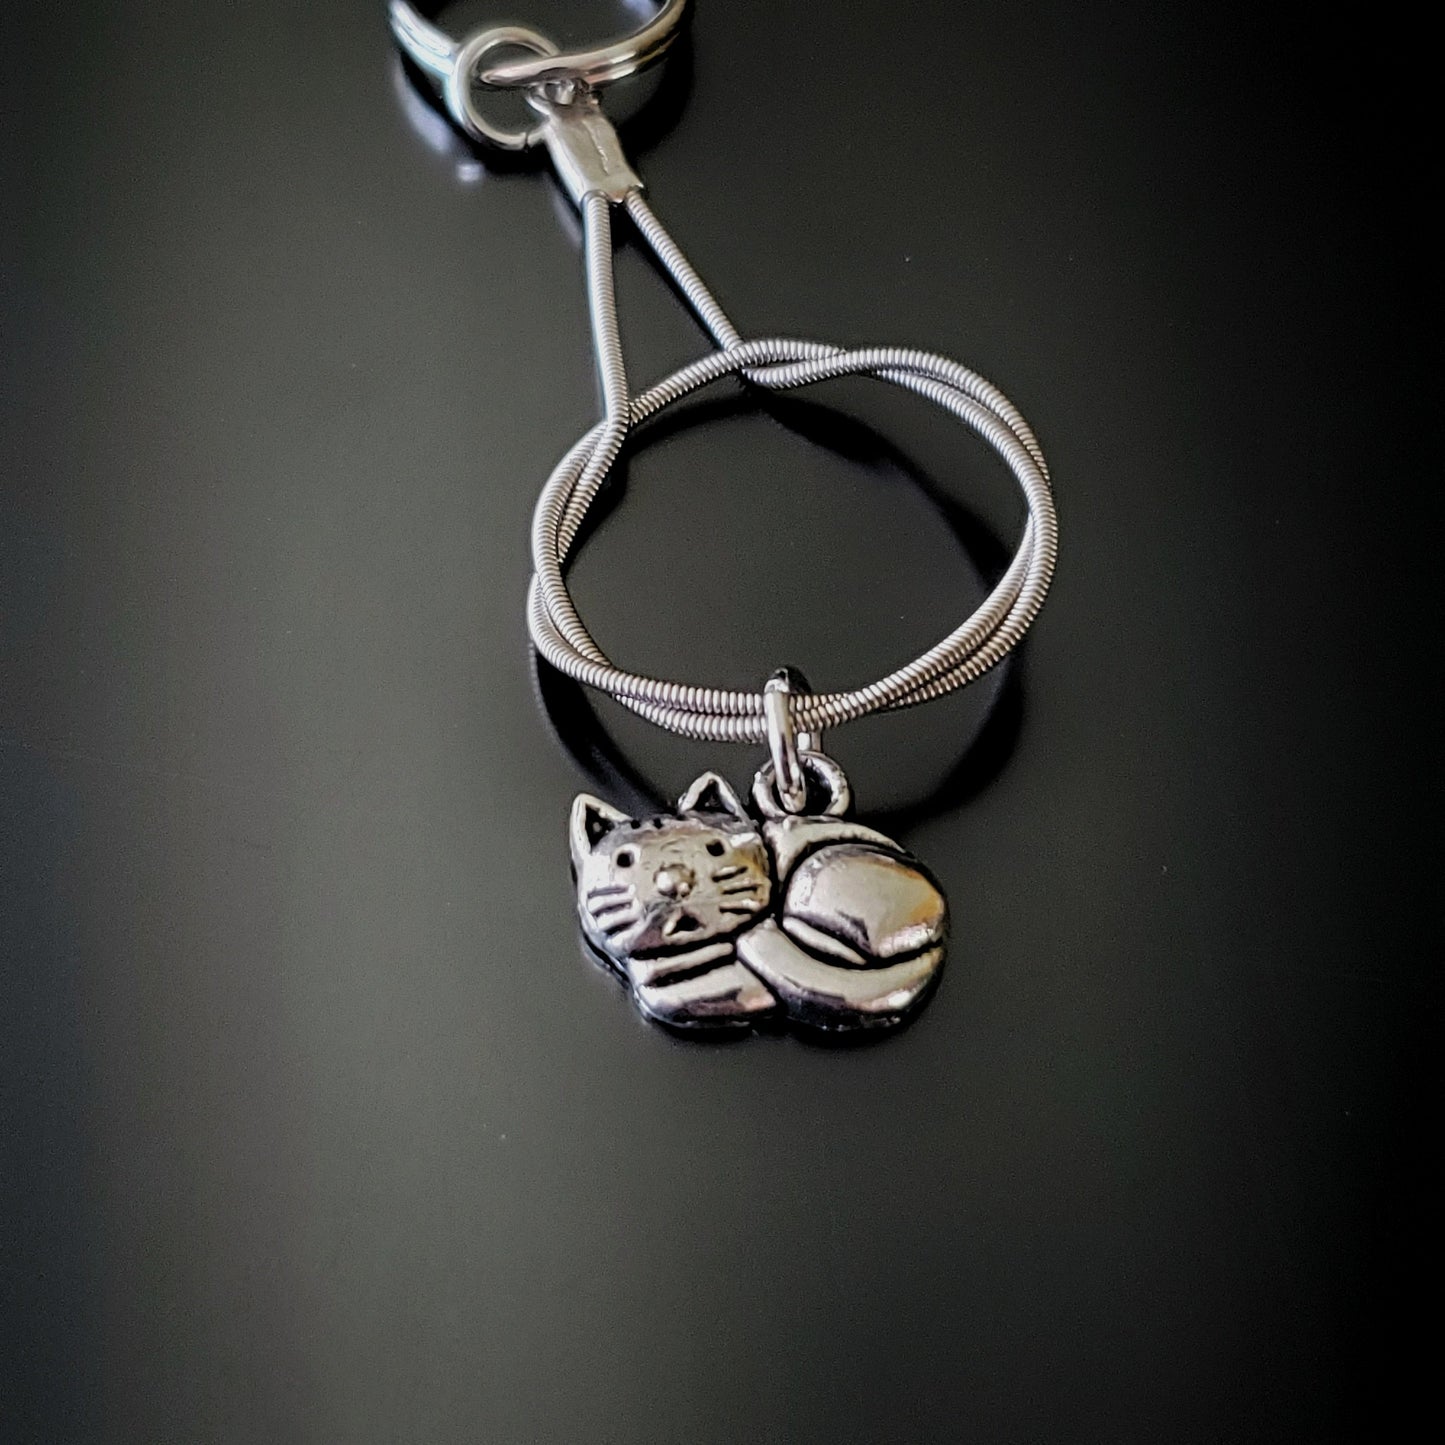 a silver coloured keychain made from an upcycled guitar string on which hangs a silver cat pendant - black background with grey shadow